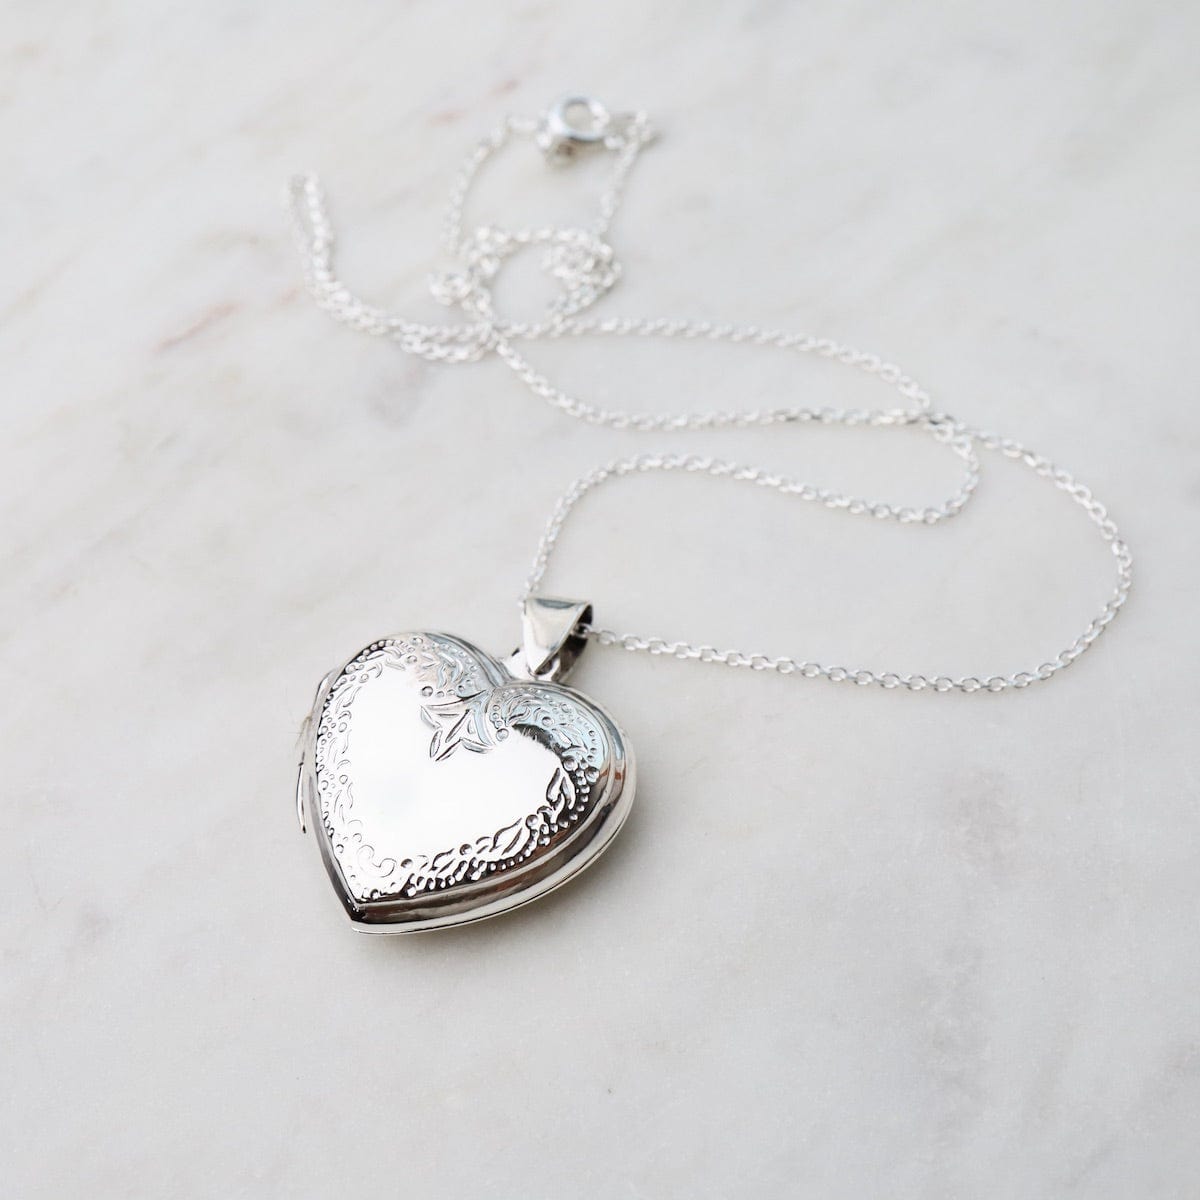 NKL Heart Locket Necklace with Edge Details